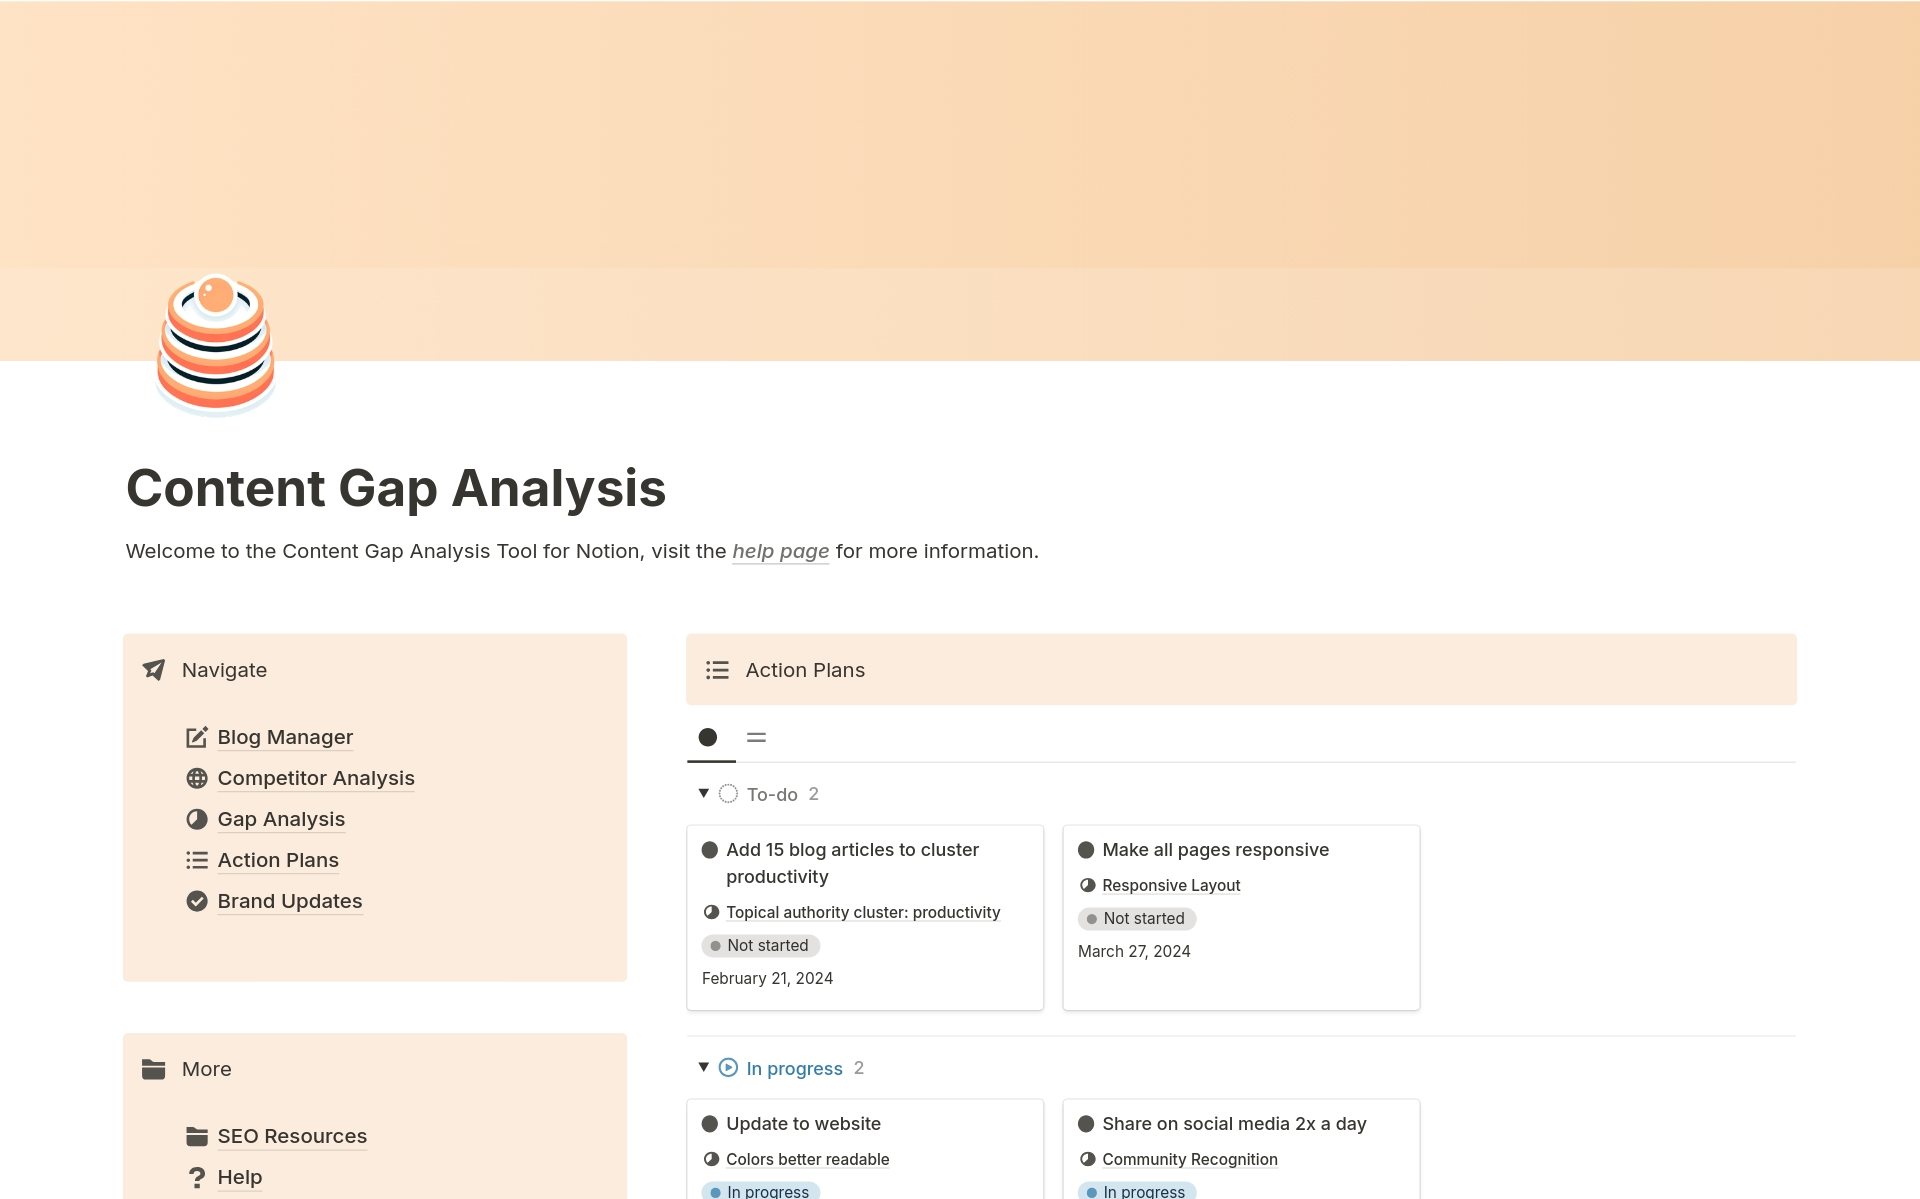 Organize your competitor research with the Content Gap Analysis.